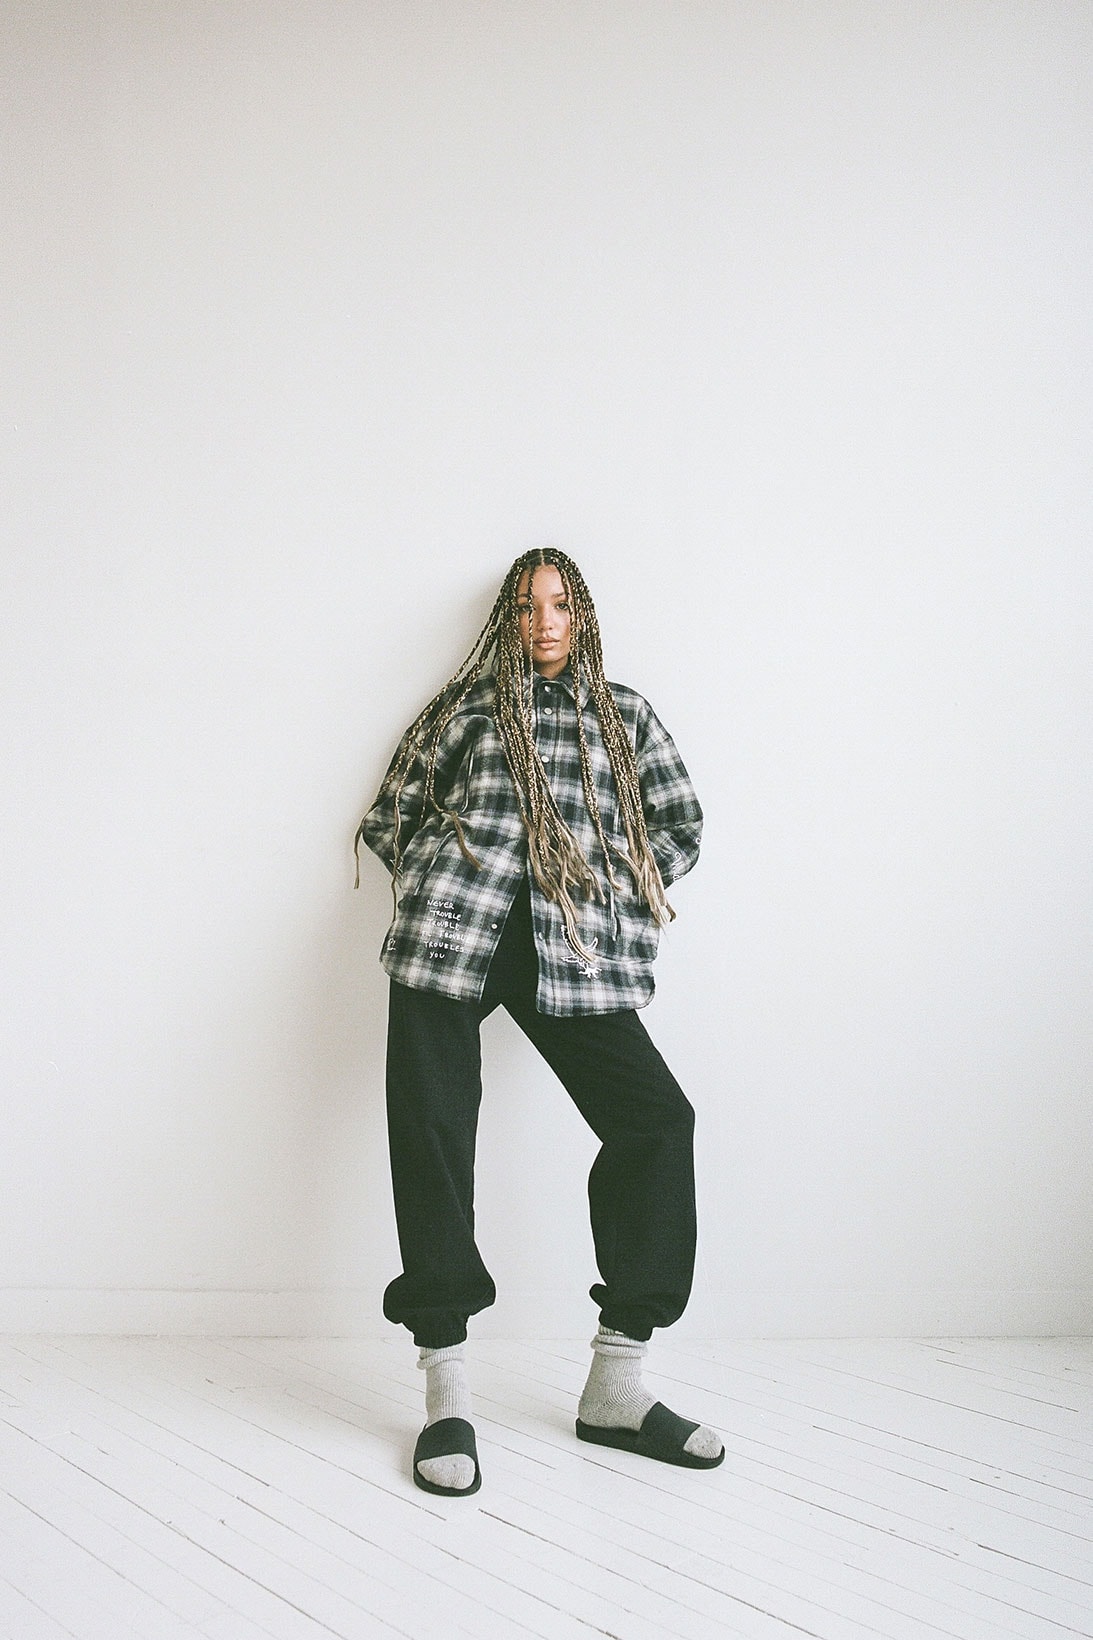 Saintwoods SW.014 Collection Flannel T-shirt Sweats